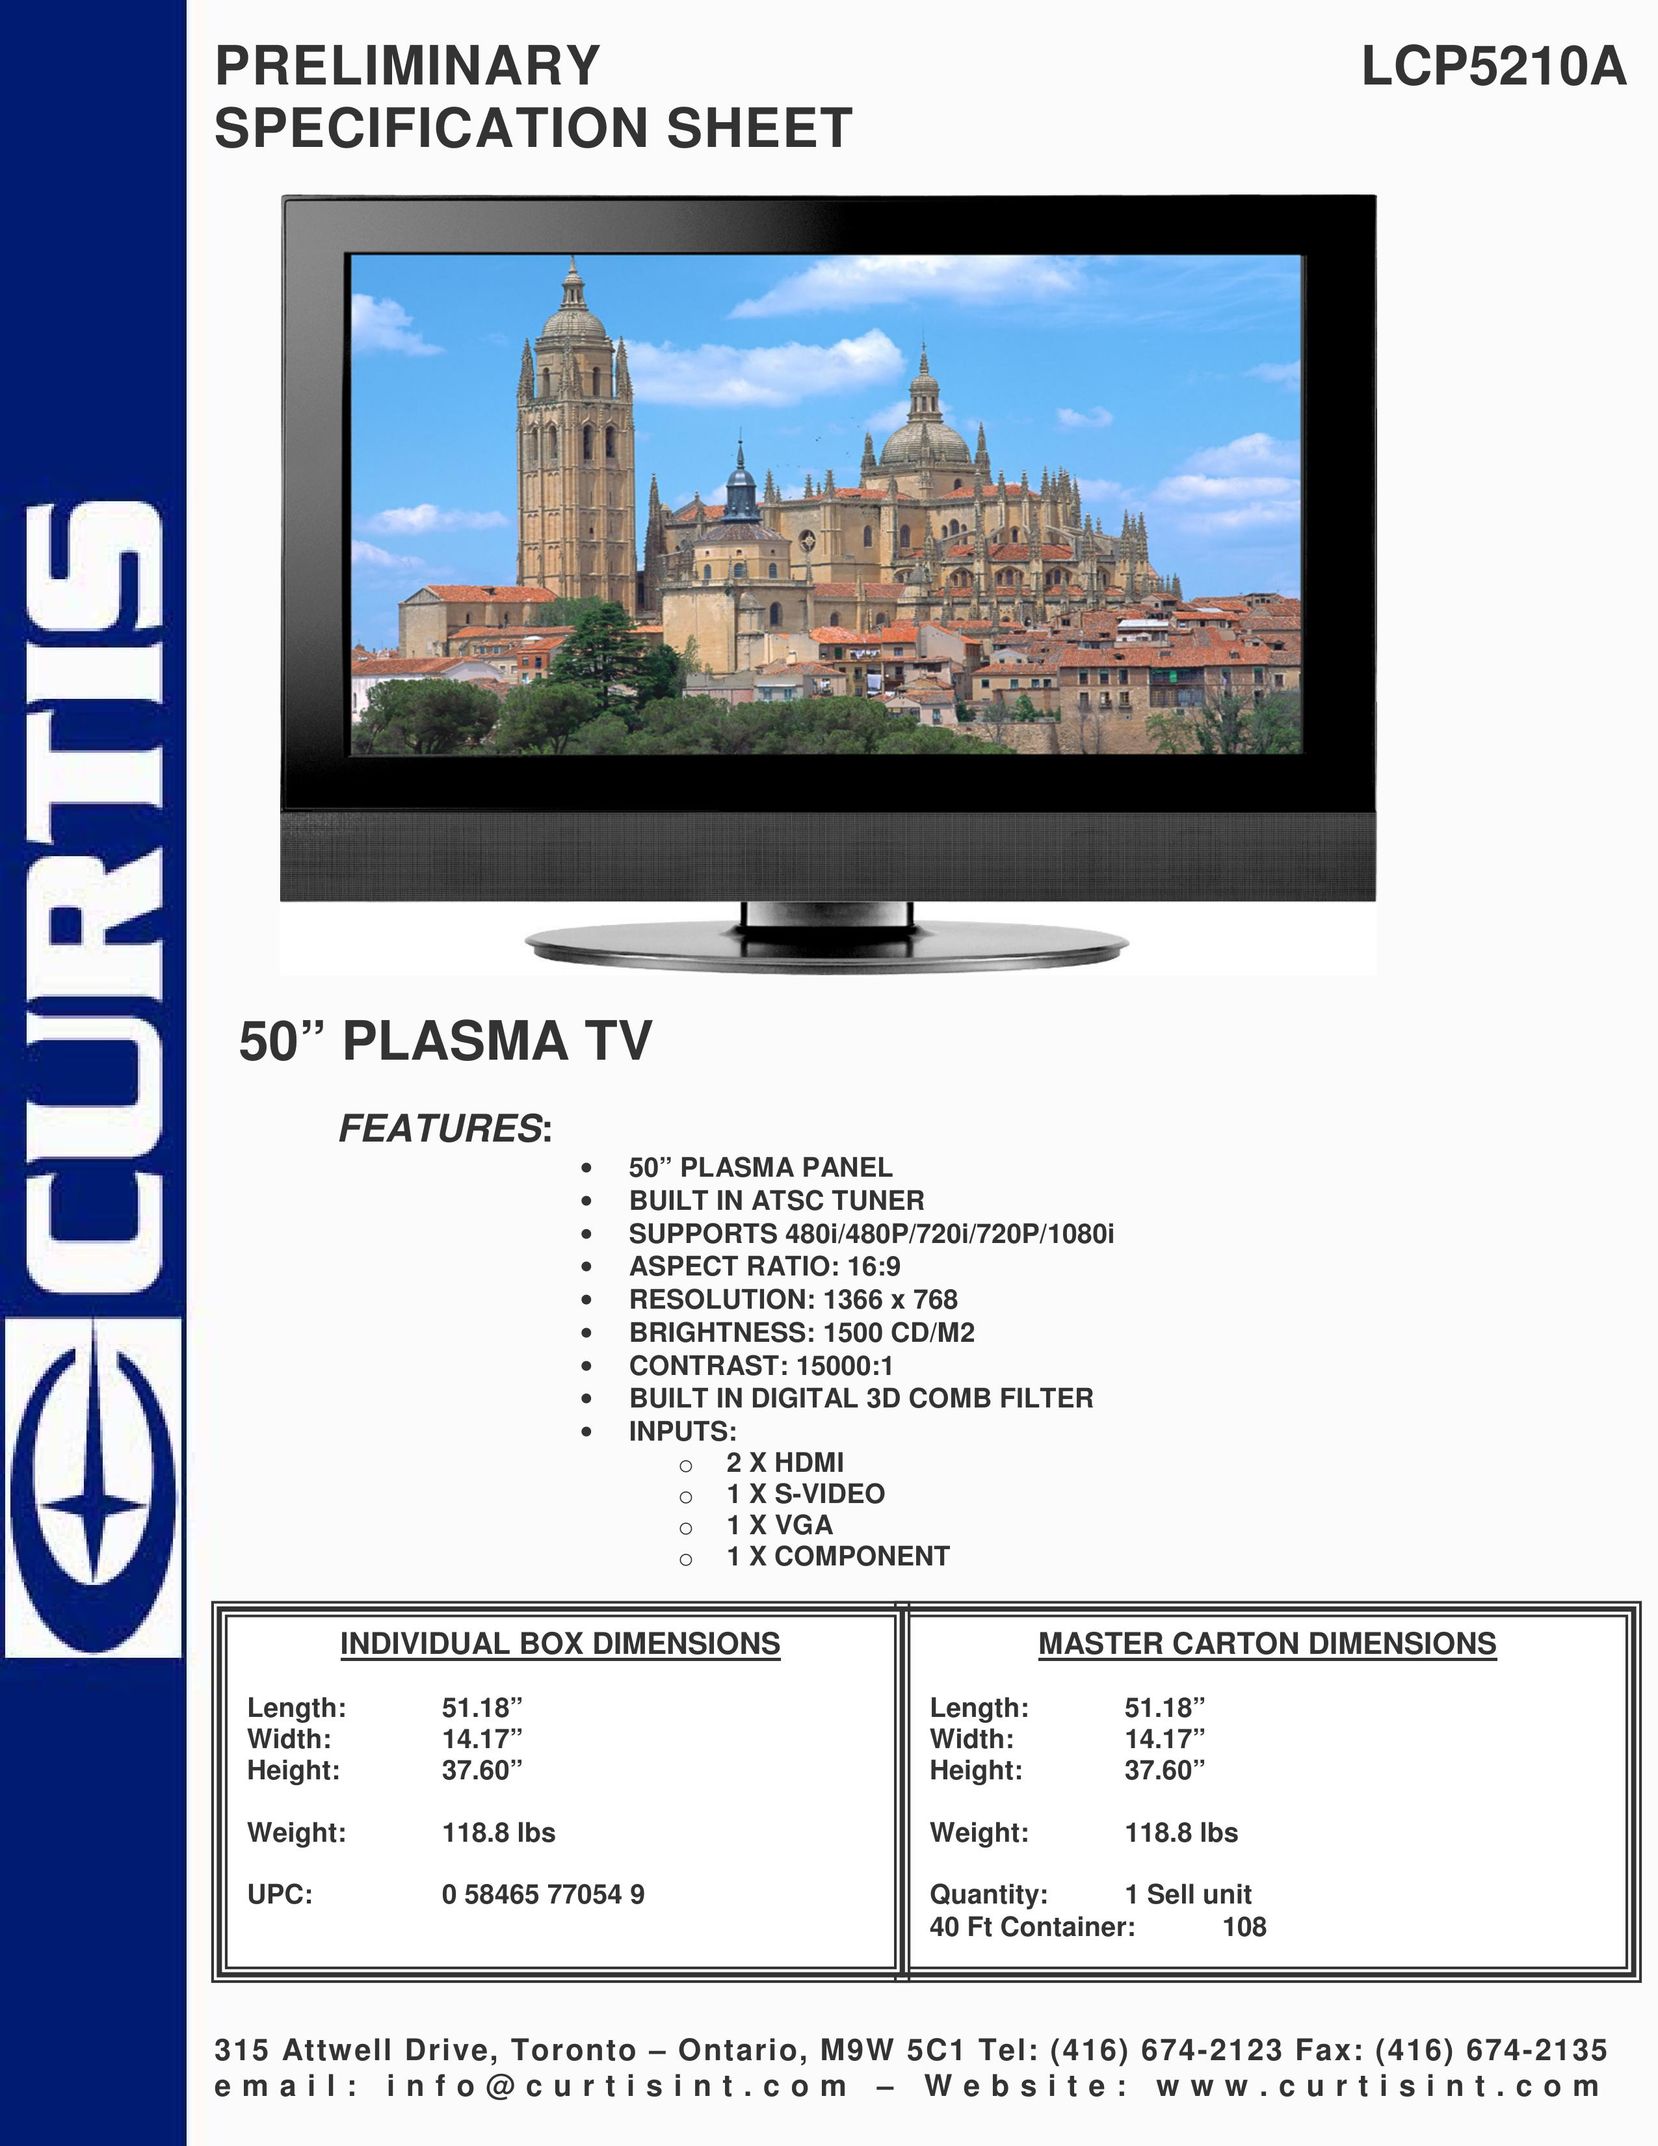 Curtis LCP5210A Flat Panel Television User Manual